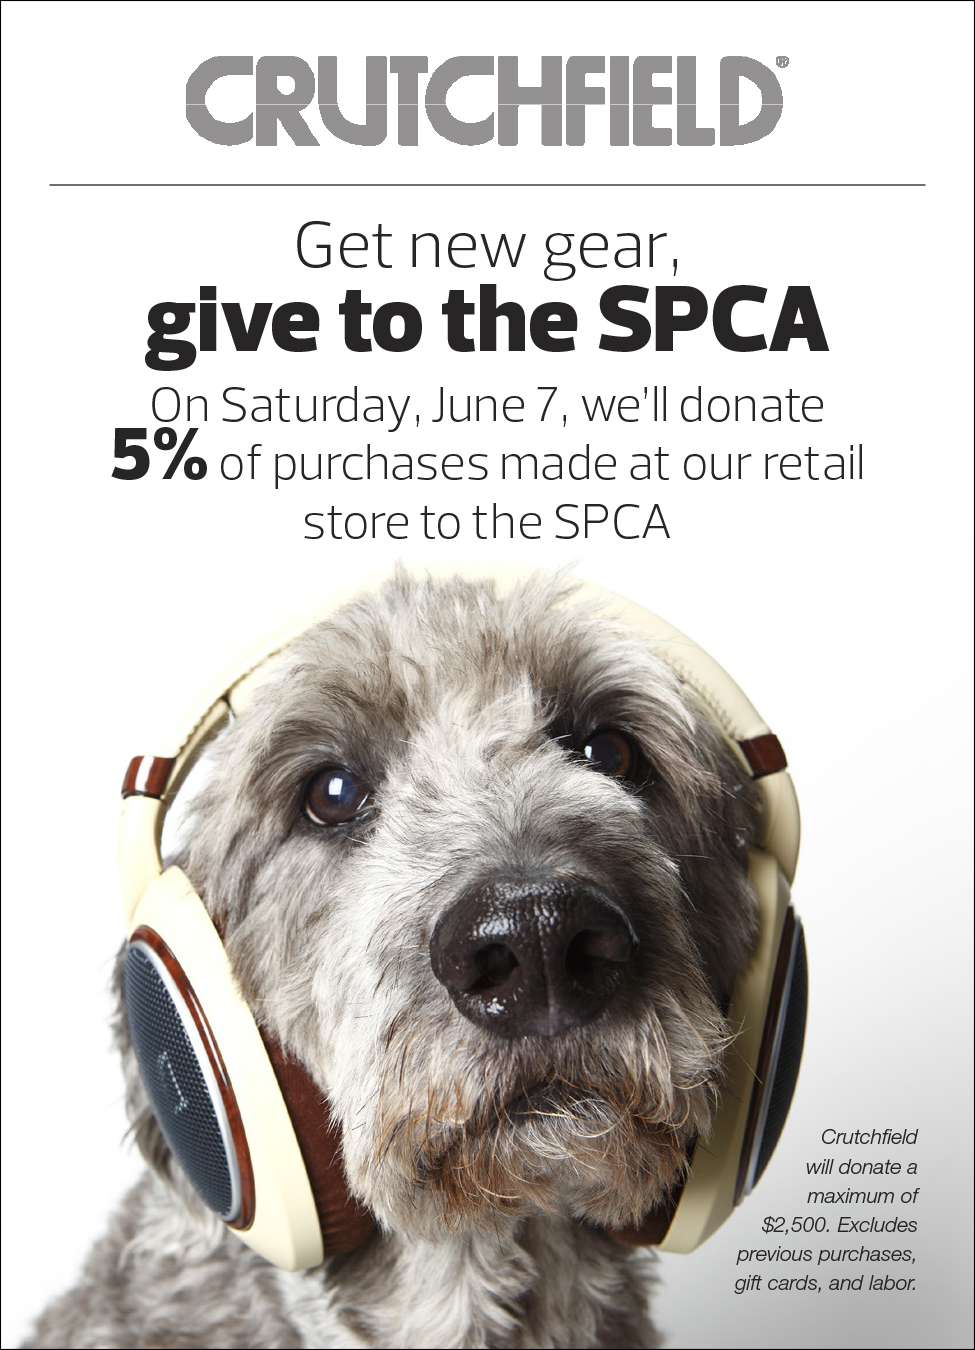 Get New Gear Give To The Spca In Crutchfield Retail This Saay 6 7 And 5 Of Purchases Will Be Donated